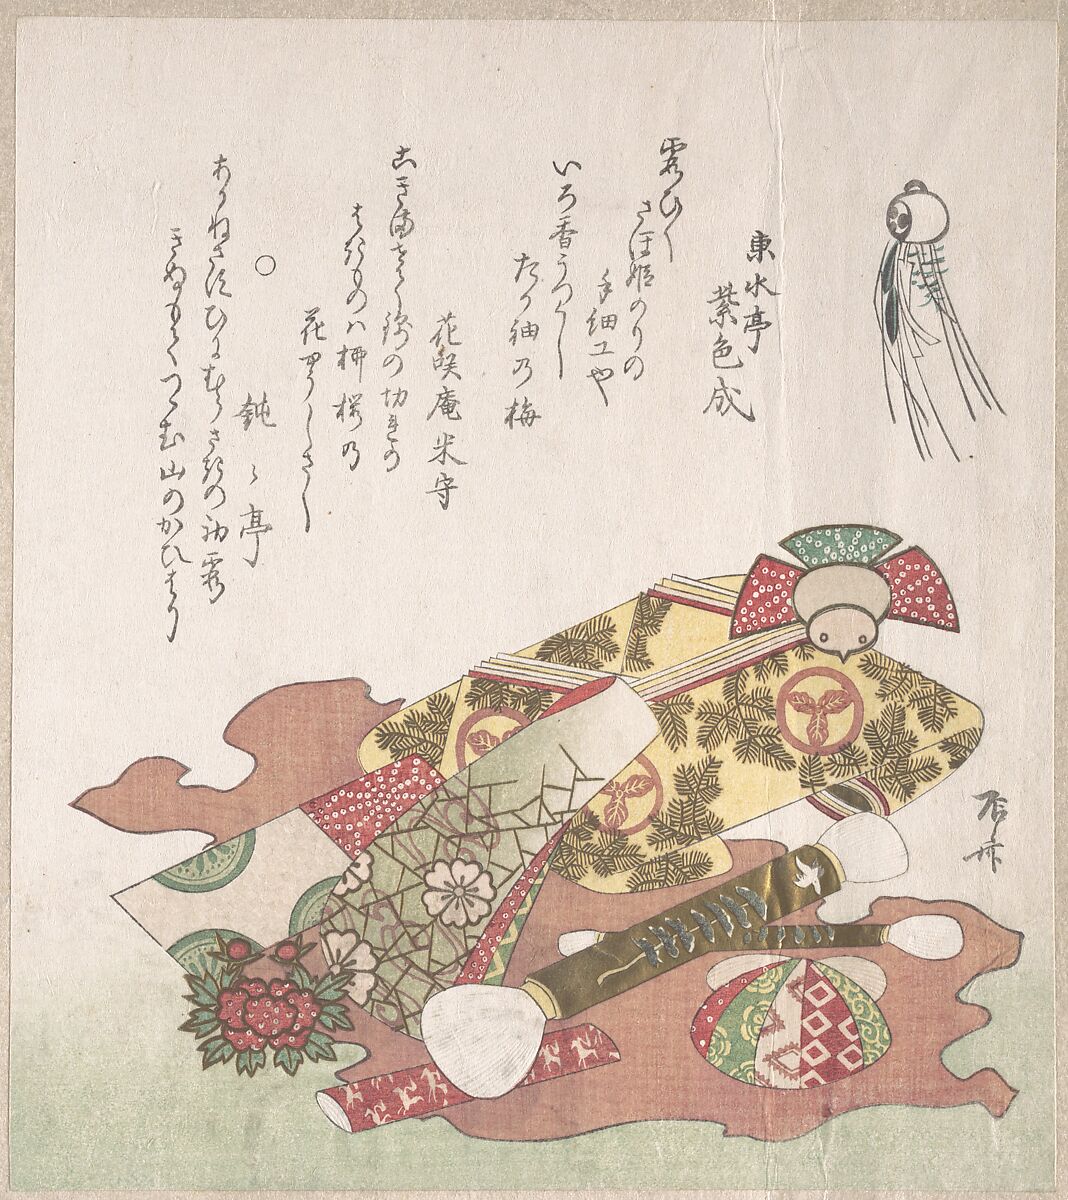 Brushes and Paper Ornaments, Ryūryūkyo Shinsai  Japanese, Part of an album of woodblock prints (surimono); ink and color on paper, Japan